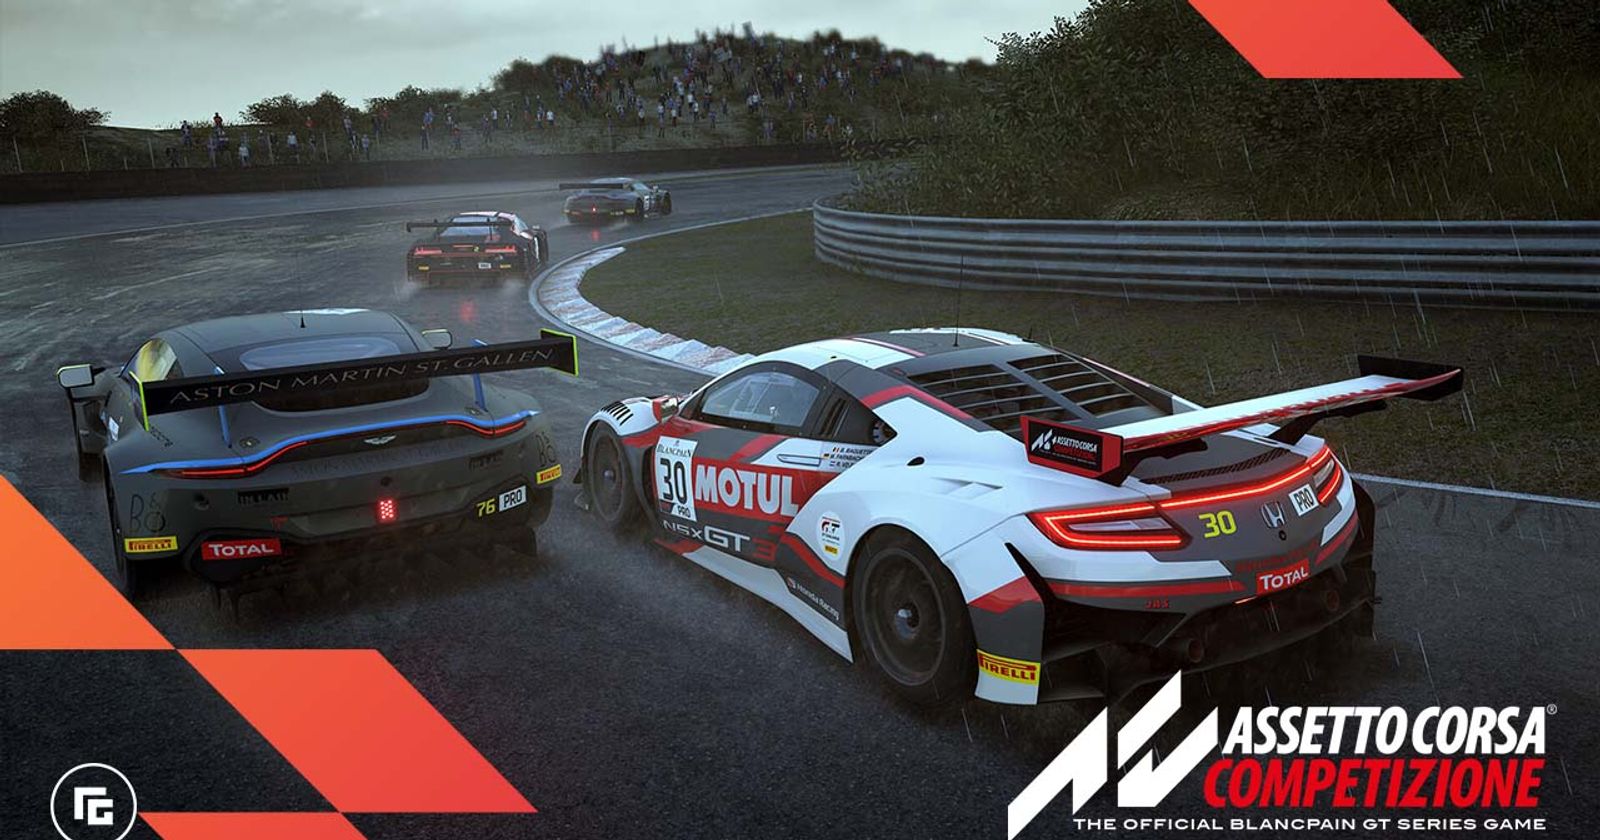 Gaming: Assetto Corsa is coming to PS4 and Xbox One